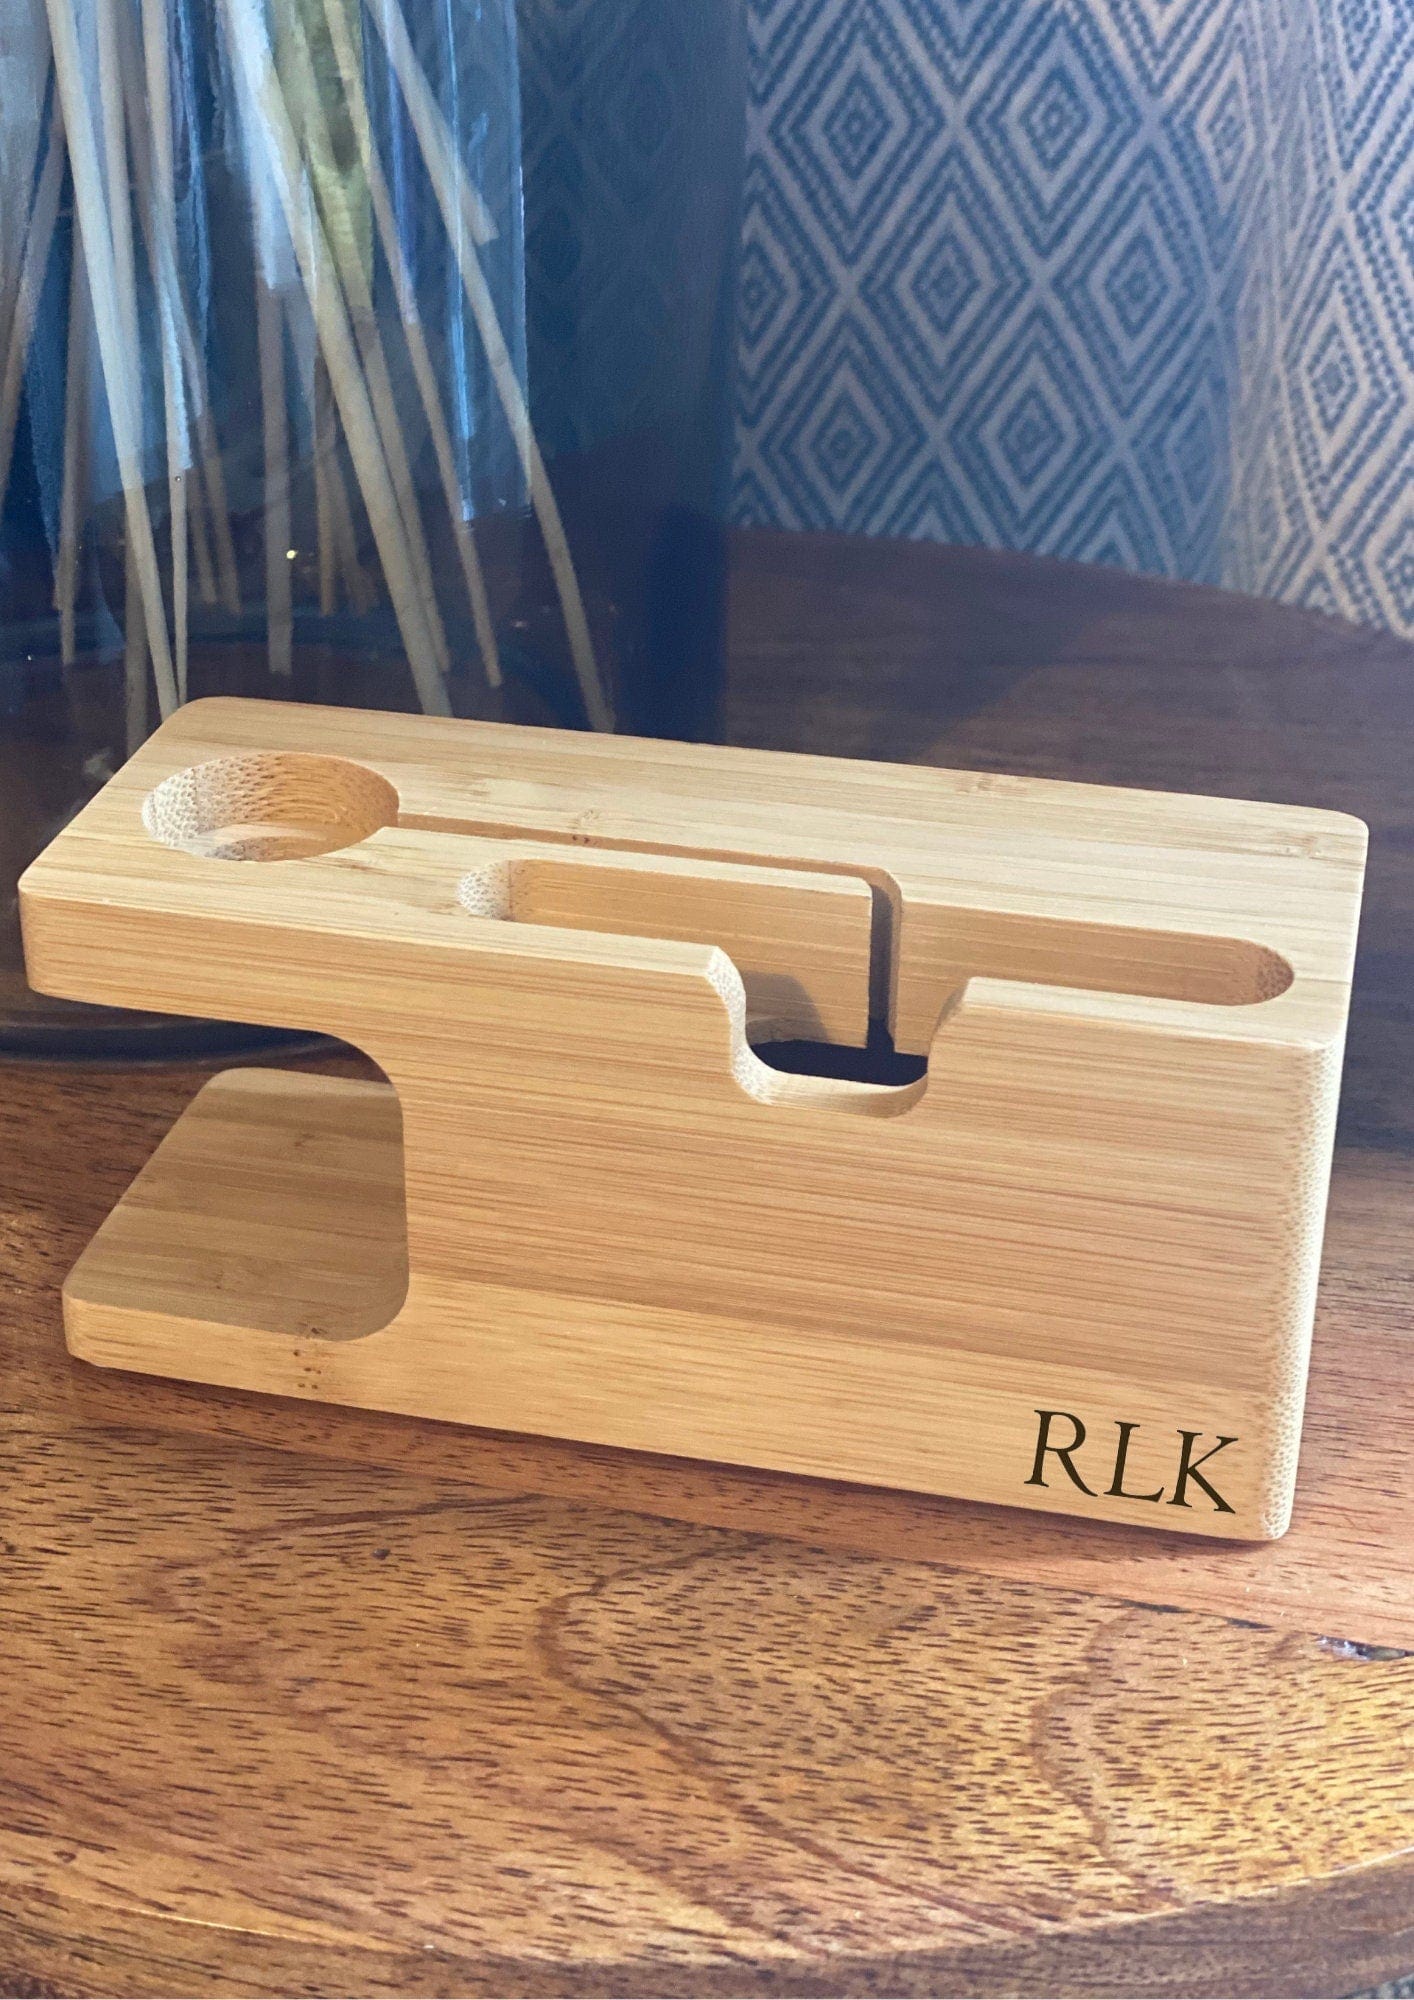 Lua Nova Charging Stations Personalised Initials - Apple Watch and Mobile Charging Station